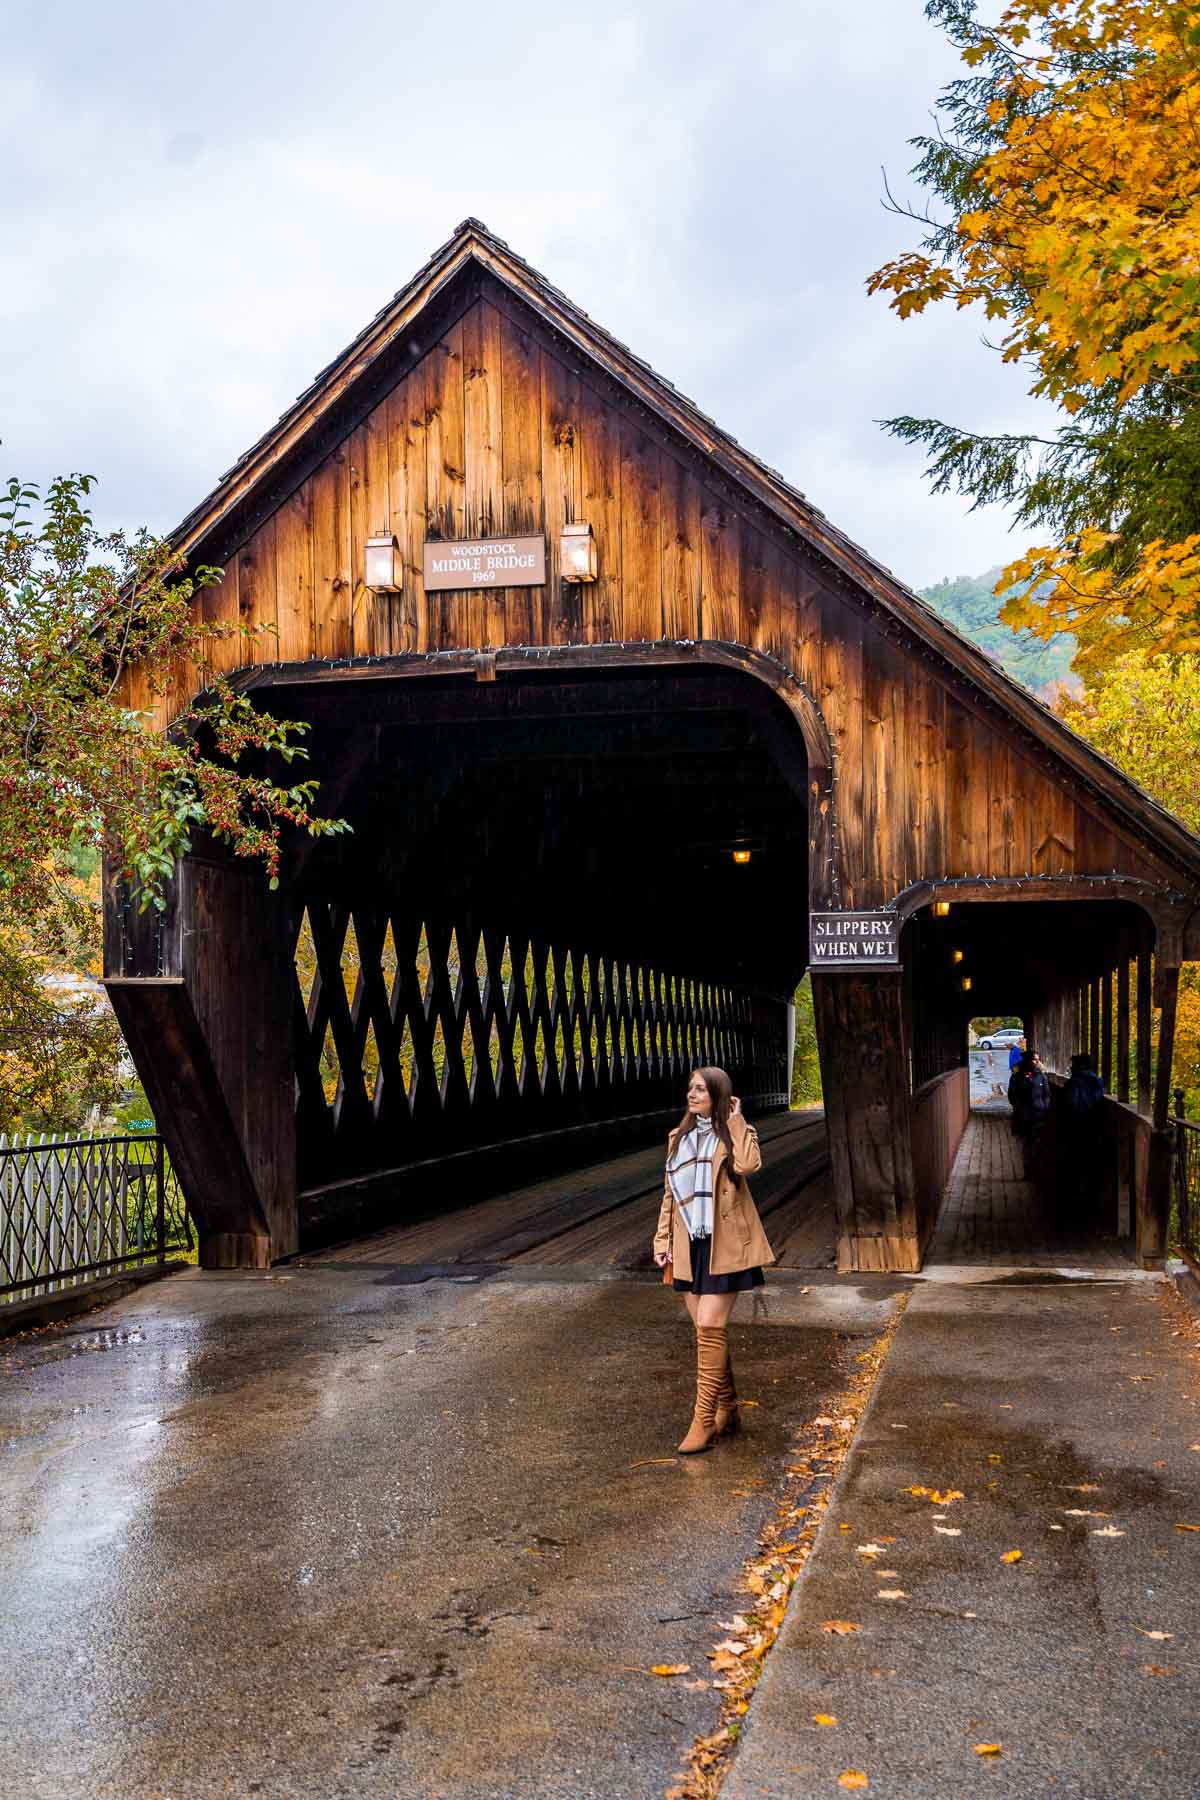 Woodstock Middle Covered Bridge in Vermont